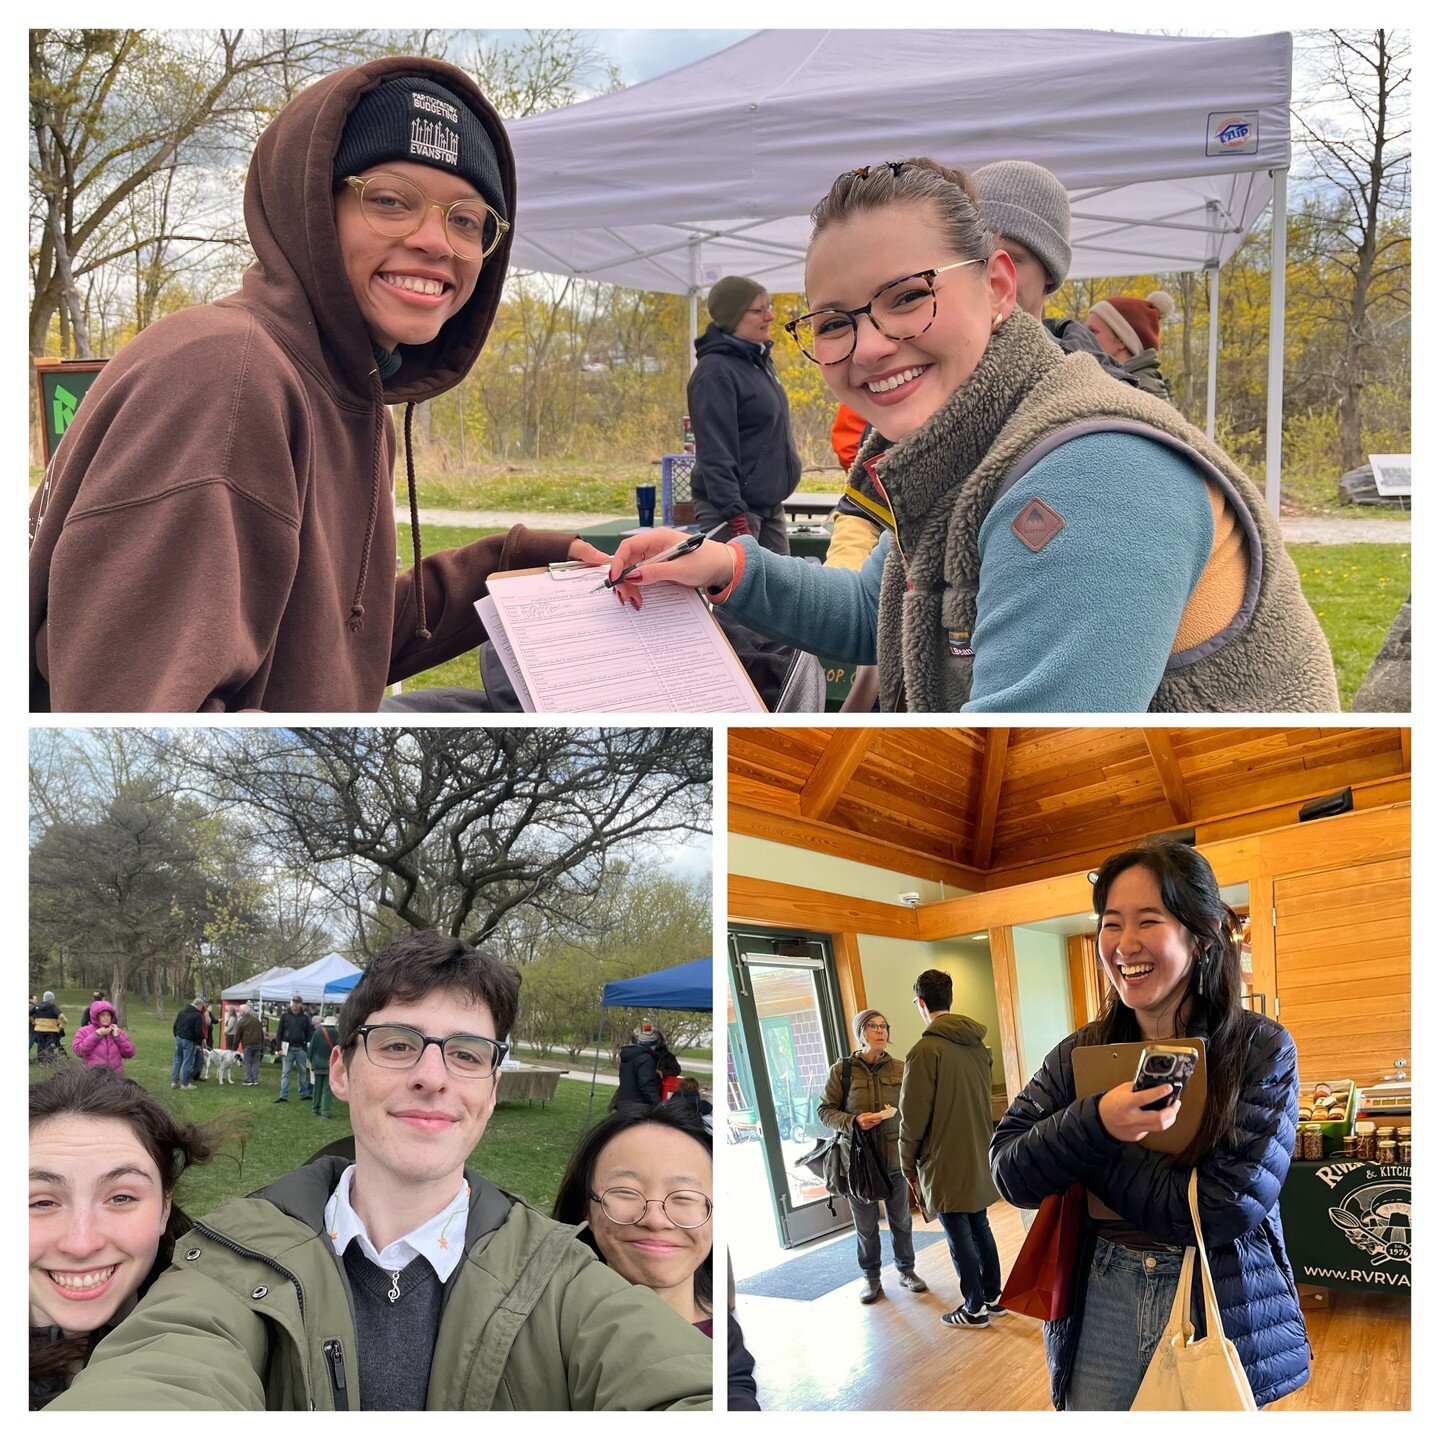 #tbt to all those smiling faces during canvassing at the Ecology Center 😁 😁 😁 

#canvassing #pbevanston #saycheese